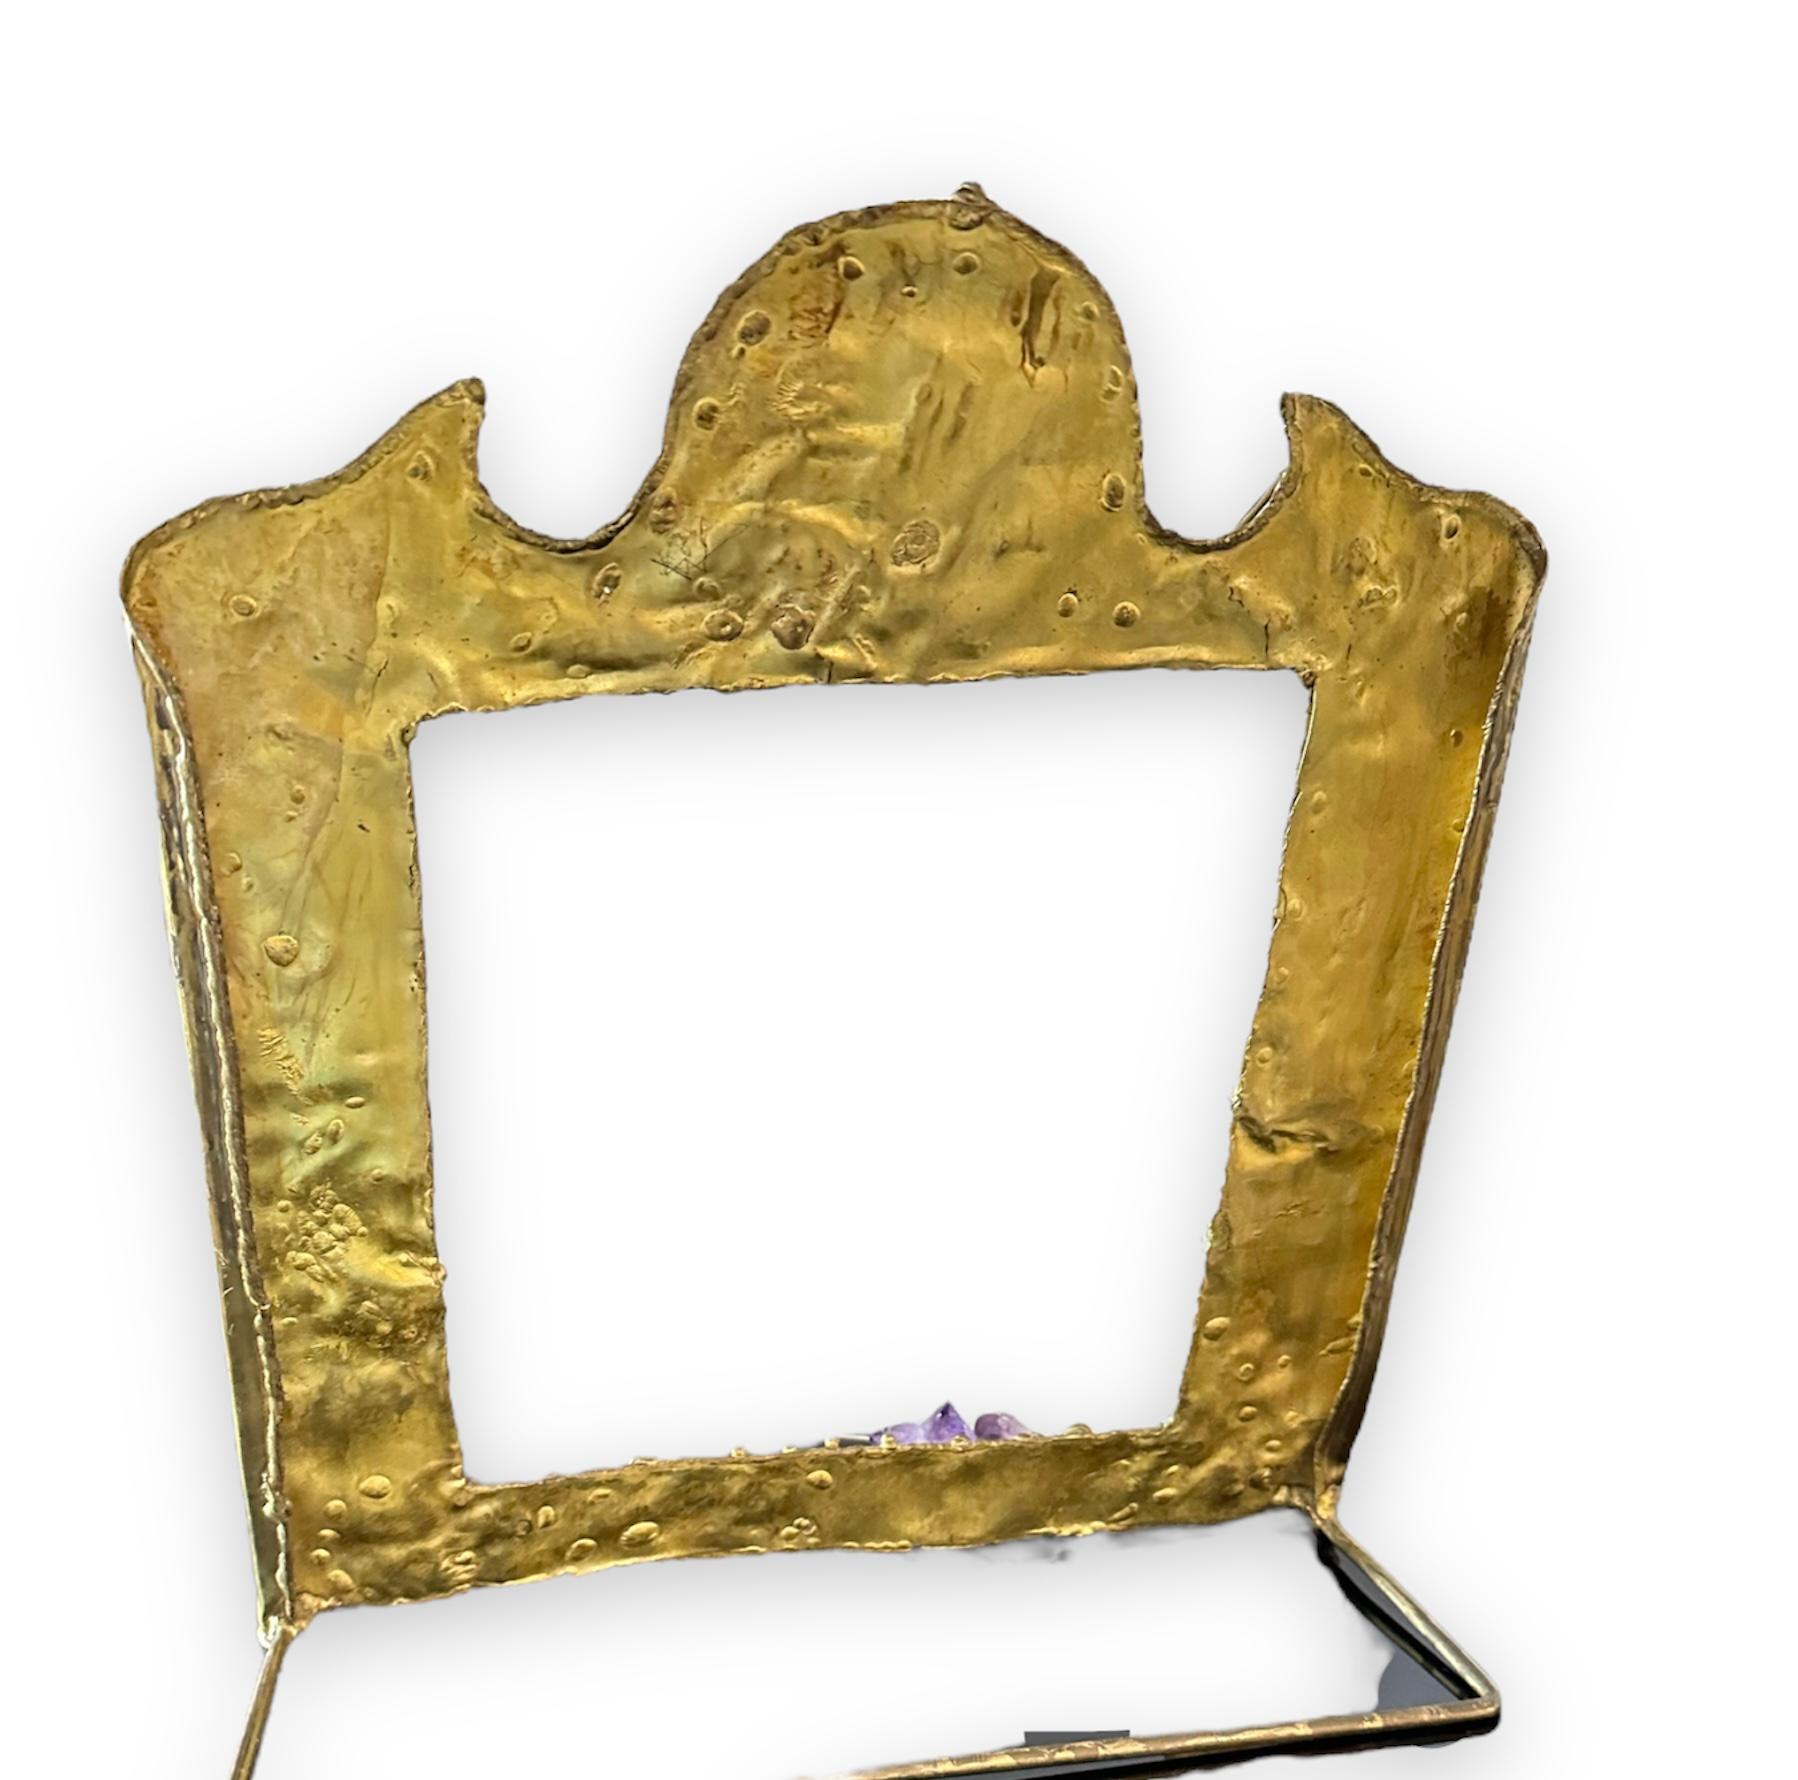 One of a kind hand-wrought textural and dimensional picture frame is a mixed media of brass with inlays of copper hints.
The jeweled like frame/mirror has dimensional juttings of raw amethyst, rose quartz and agate. It is sculptural and